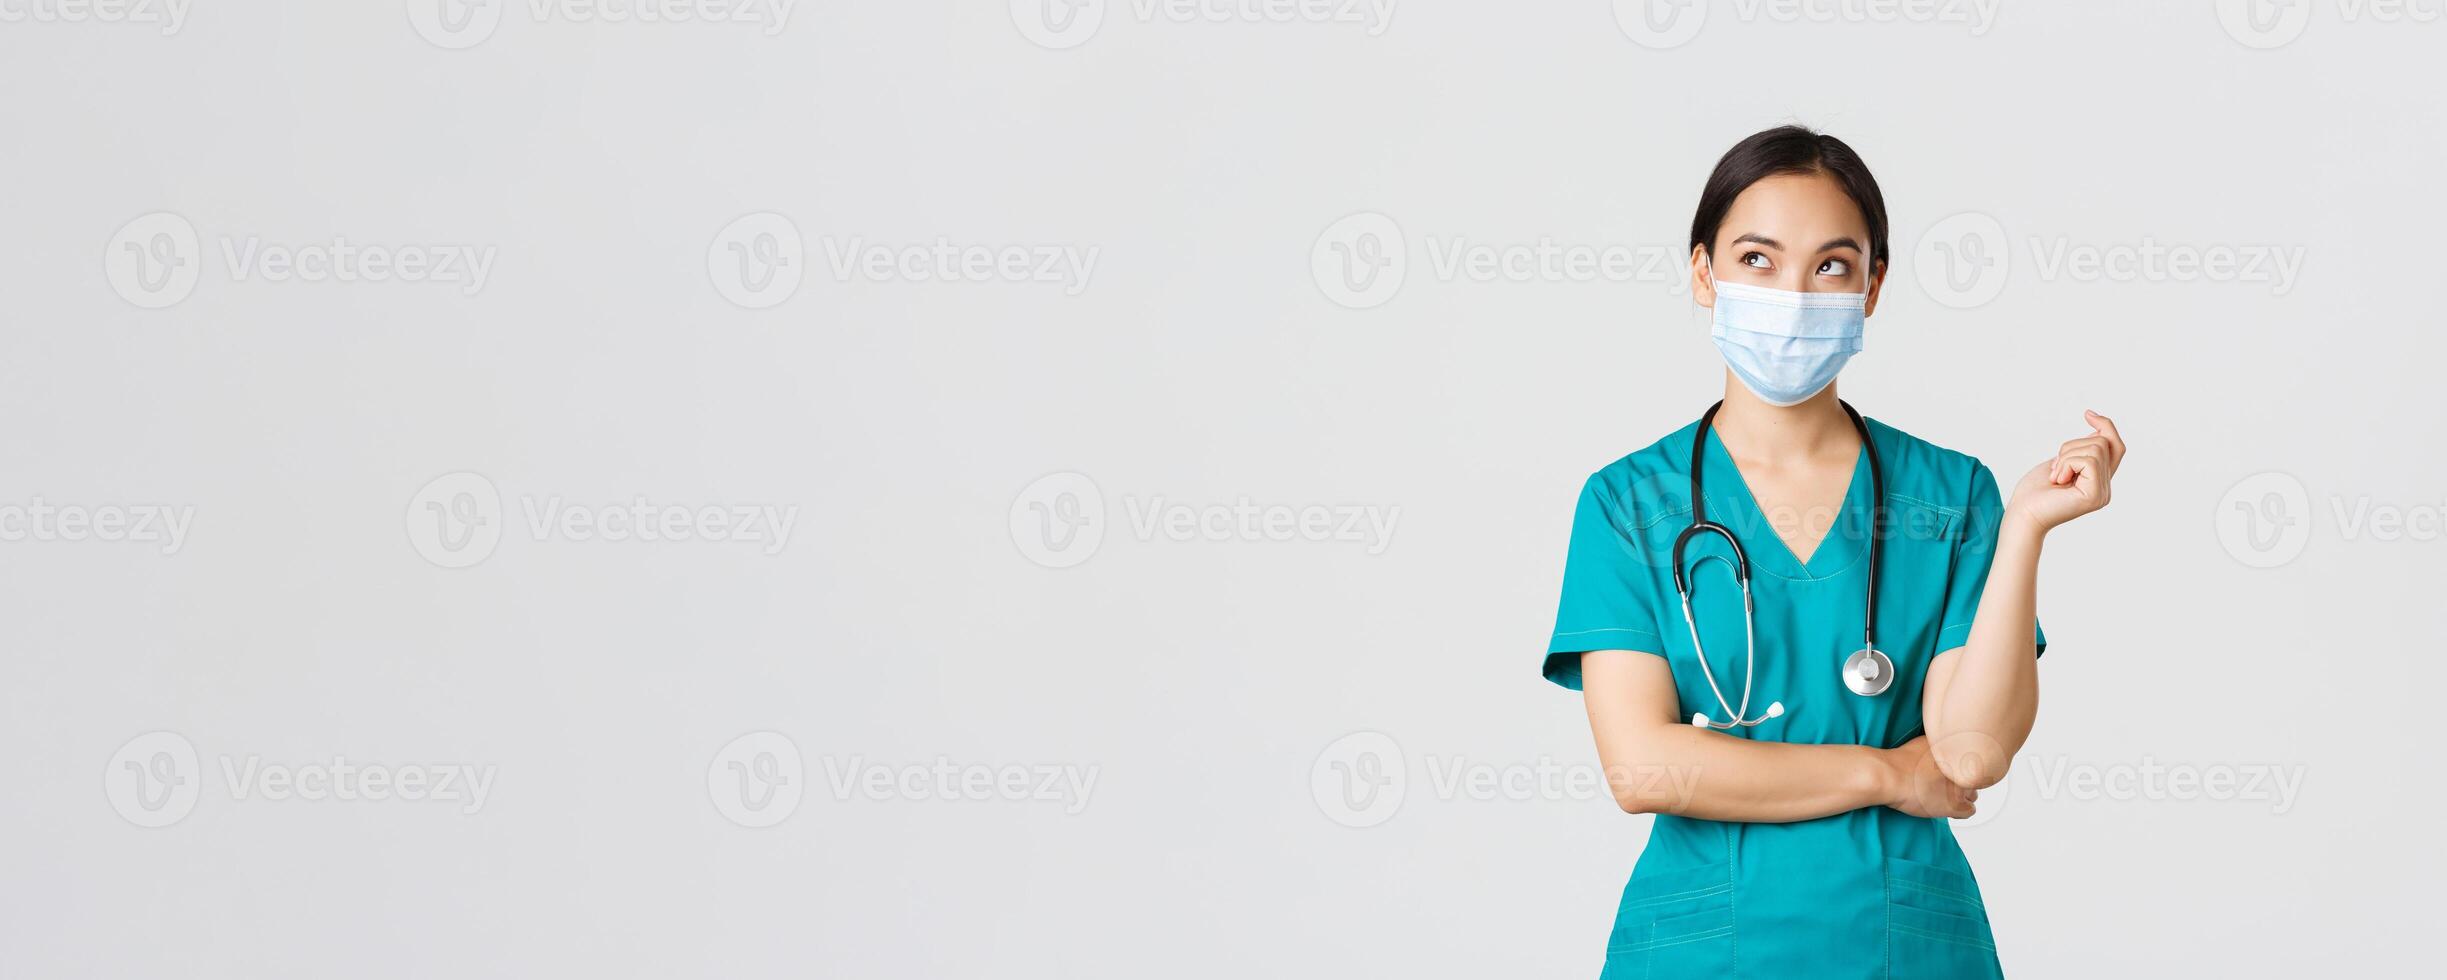 Covid-19, coronavirus disease, healthcare workers concept. Curious and thoughtful asian female doctor in medical mask and scrubs, looking upper left corner, thinking, white background photo